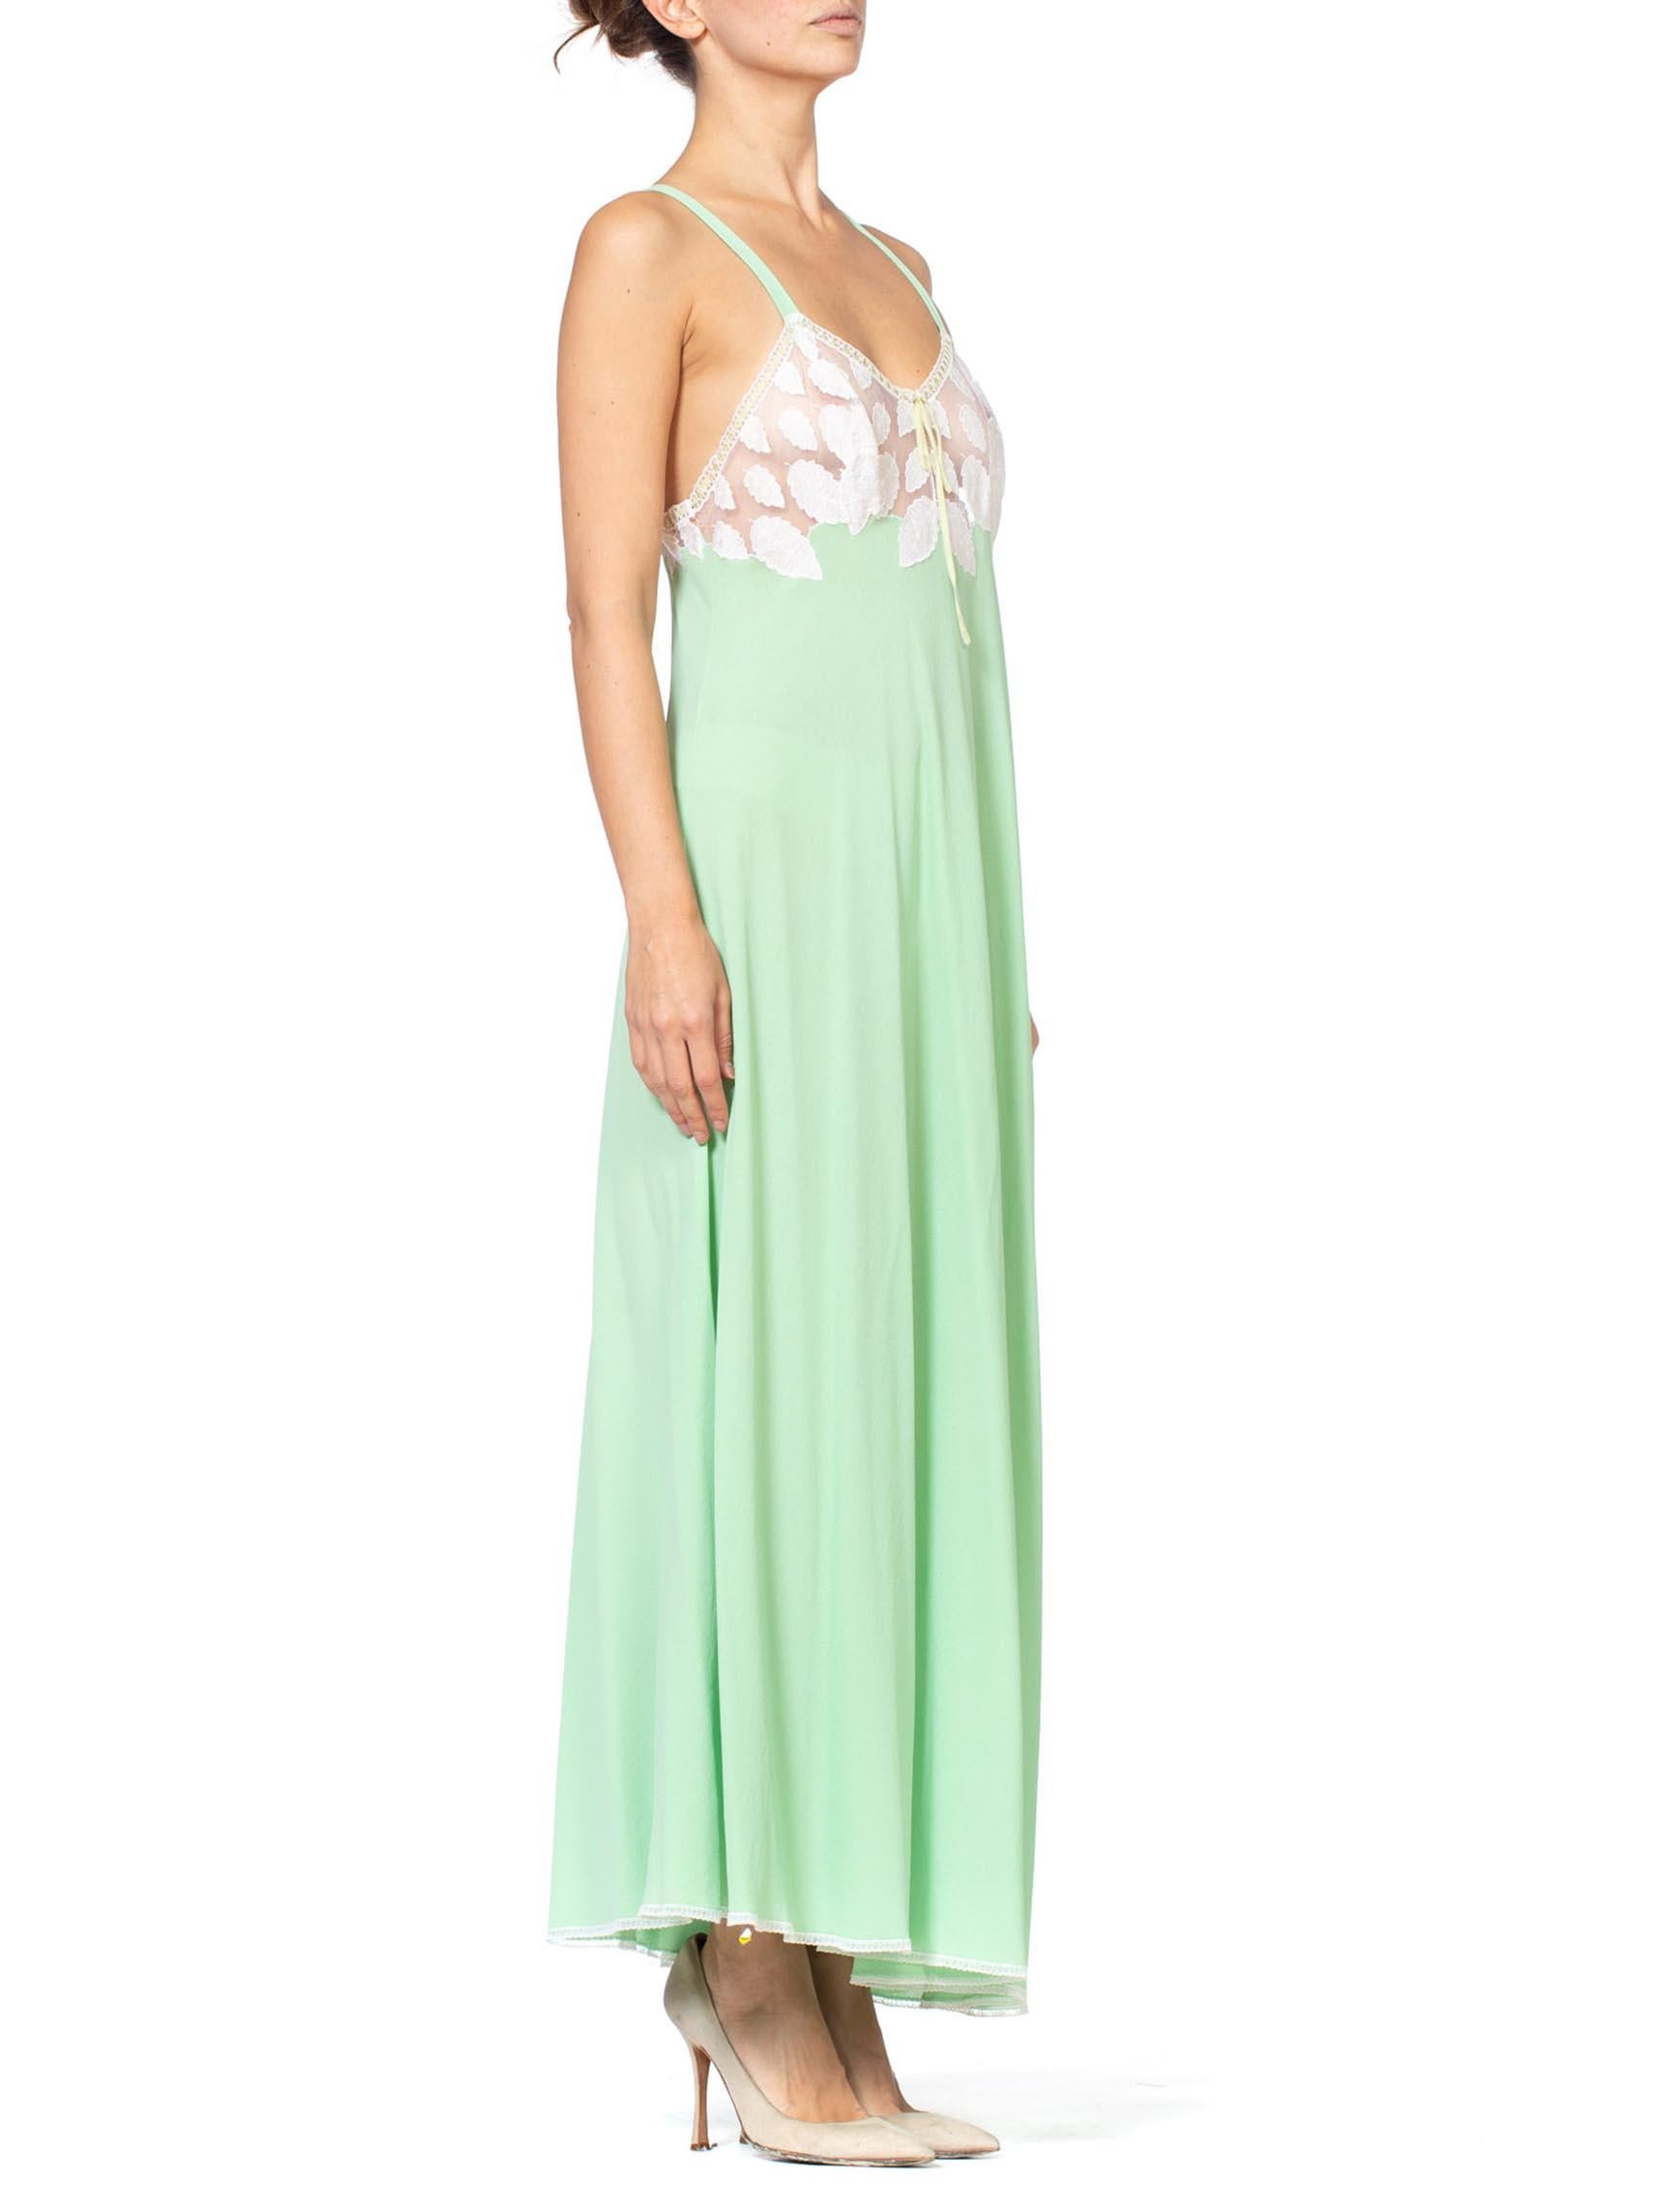 1970S Mint Green Polyester Jersey & White Lace Negligee Slip Dress 1